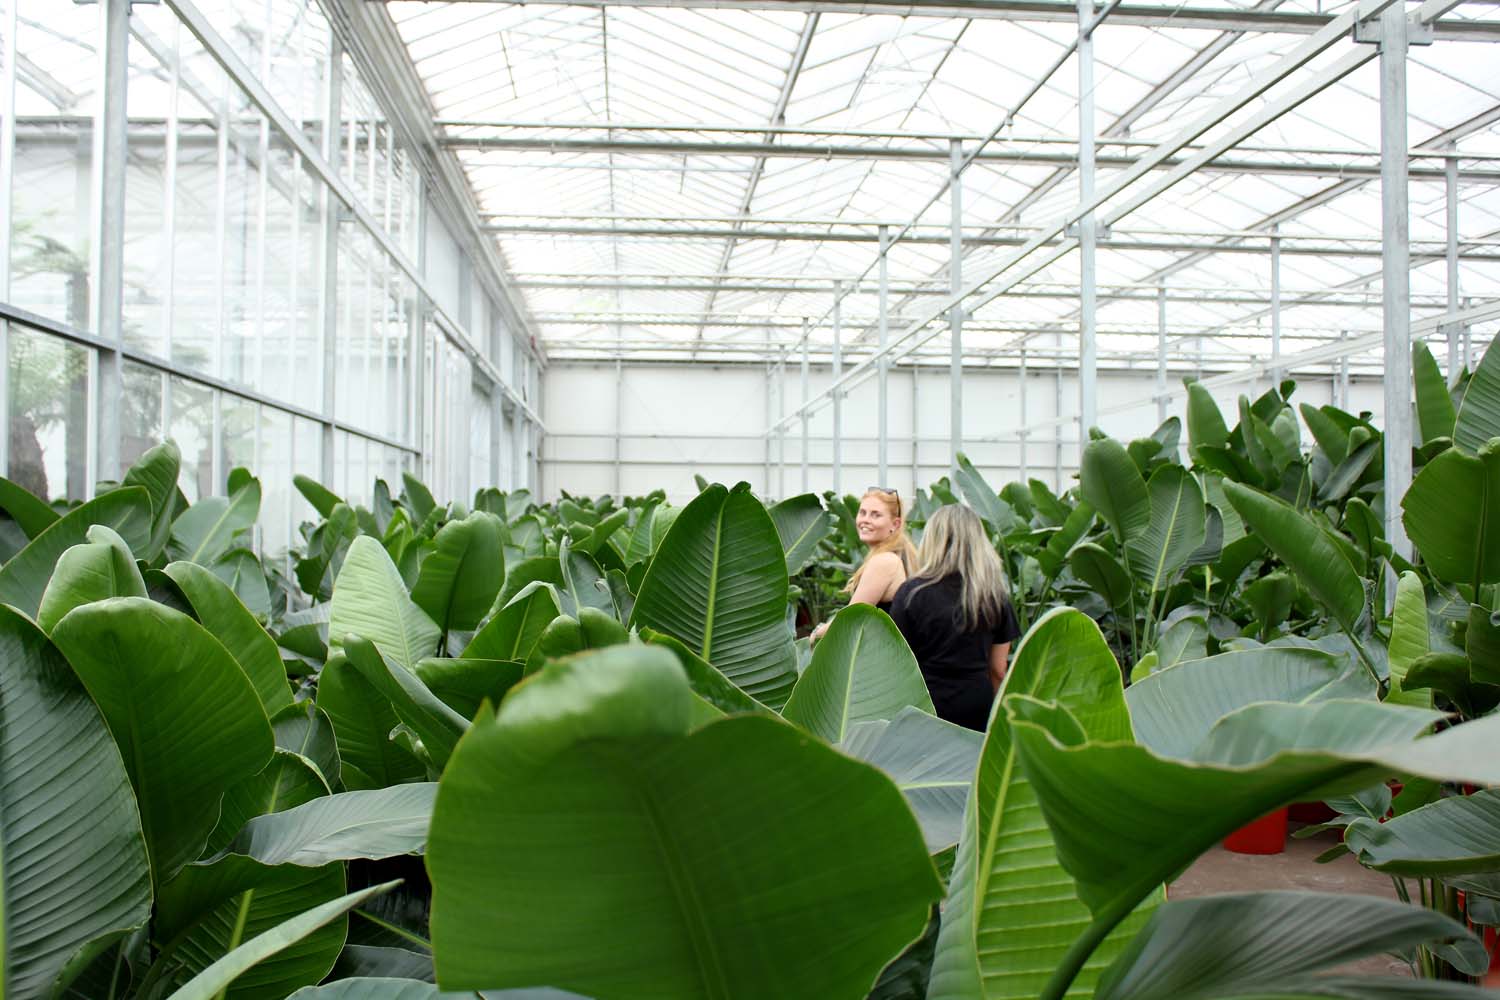 Large plants in a greenhouse with 2 people walking between leaves